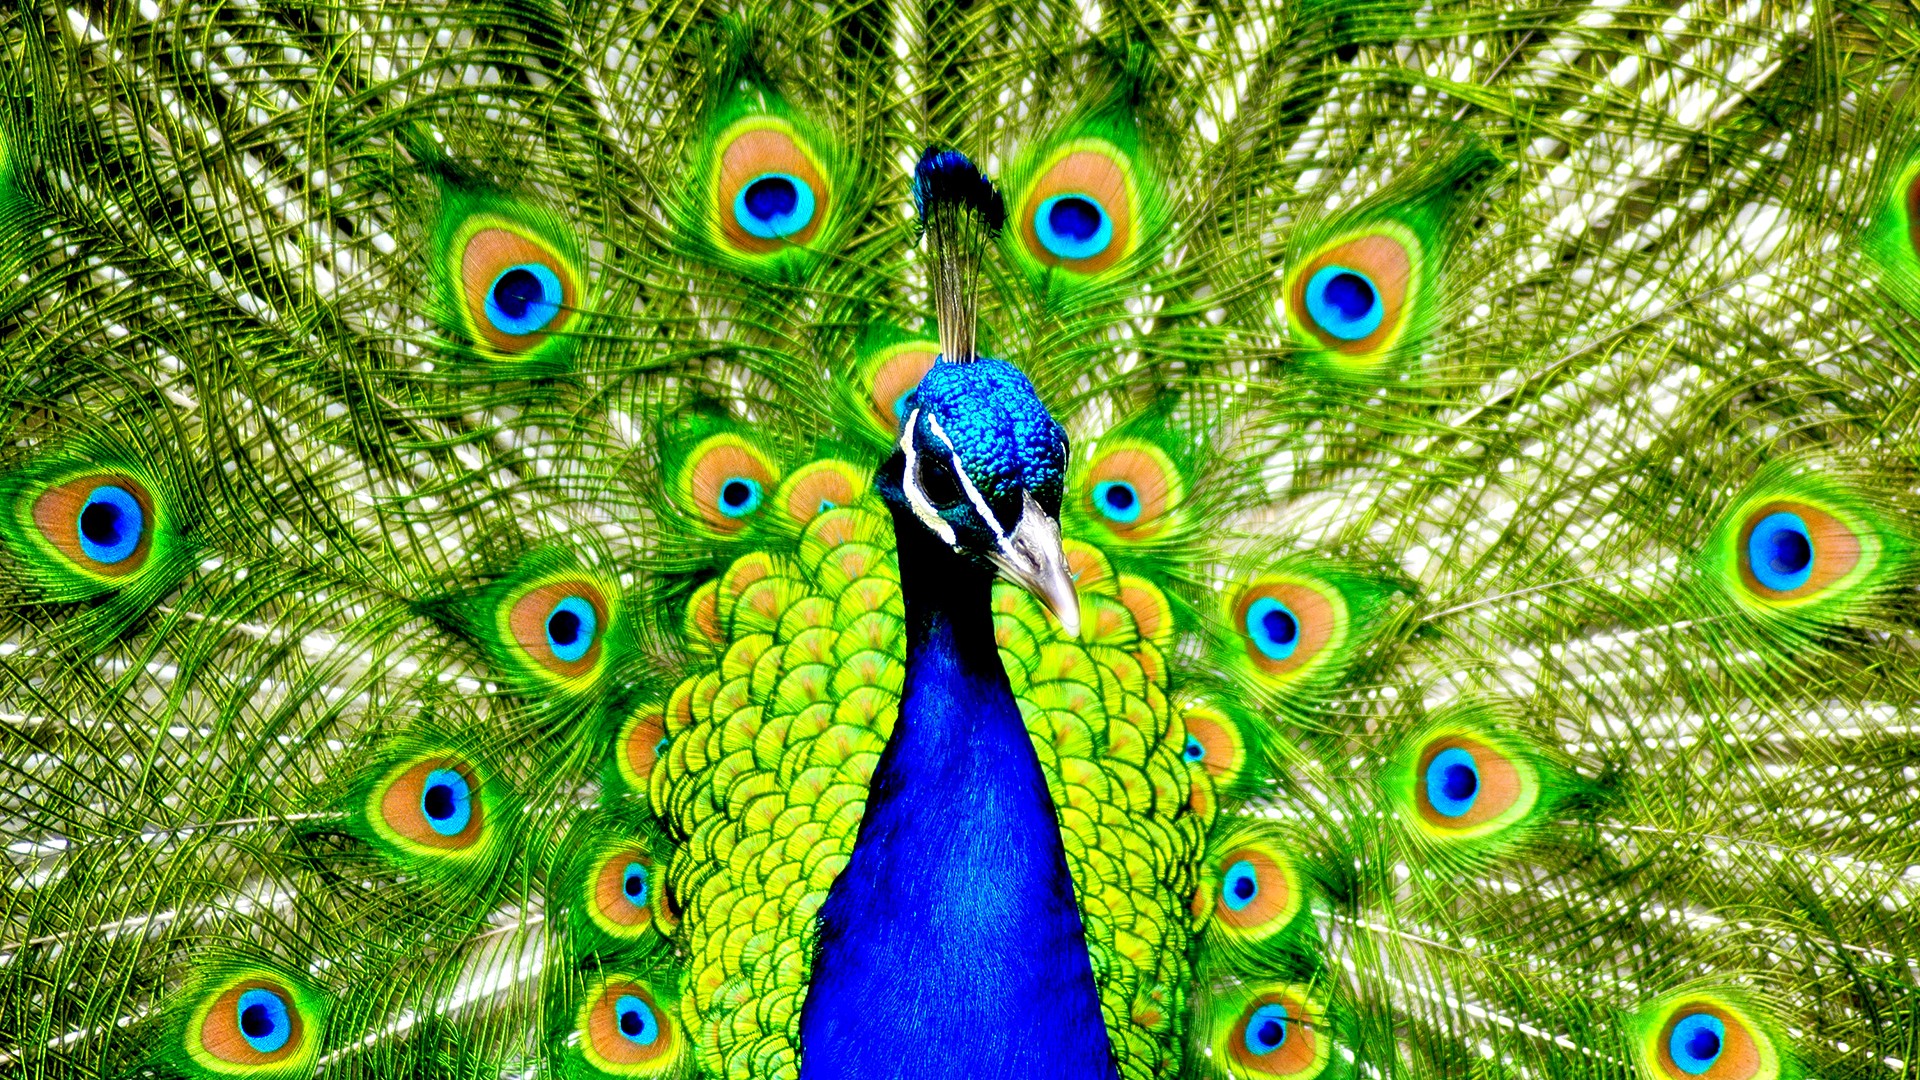 Peacock Wallpaper Live HD Wallpaper HQ Pictures Images Photos